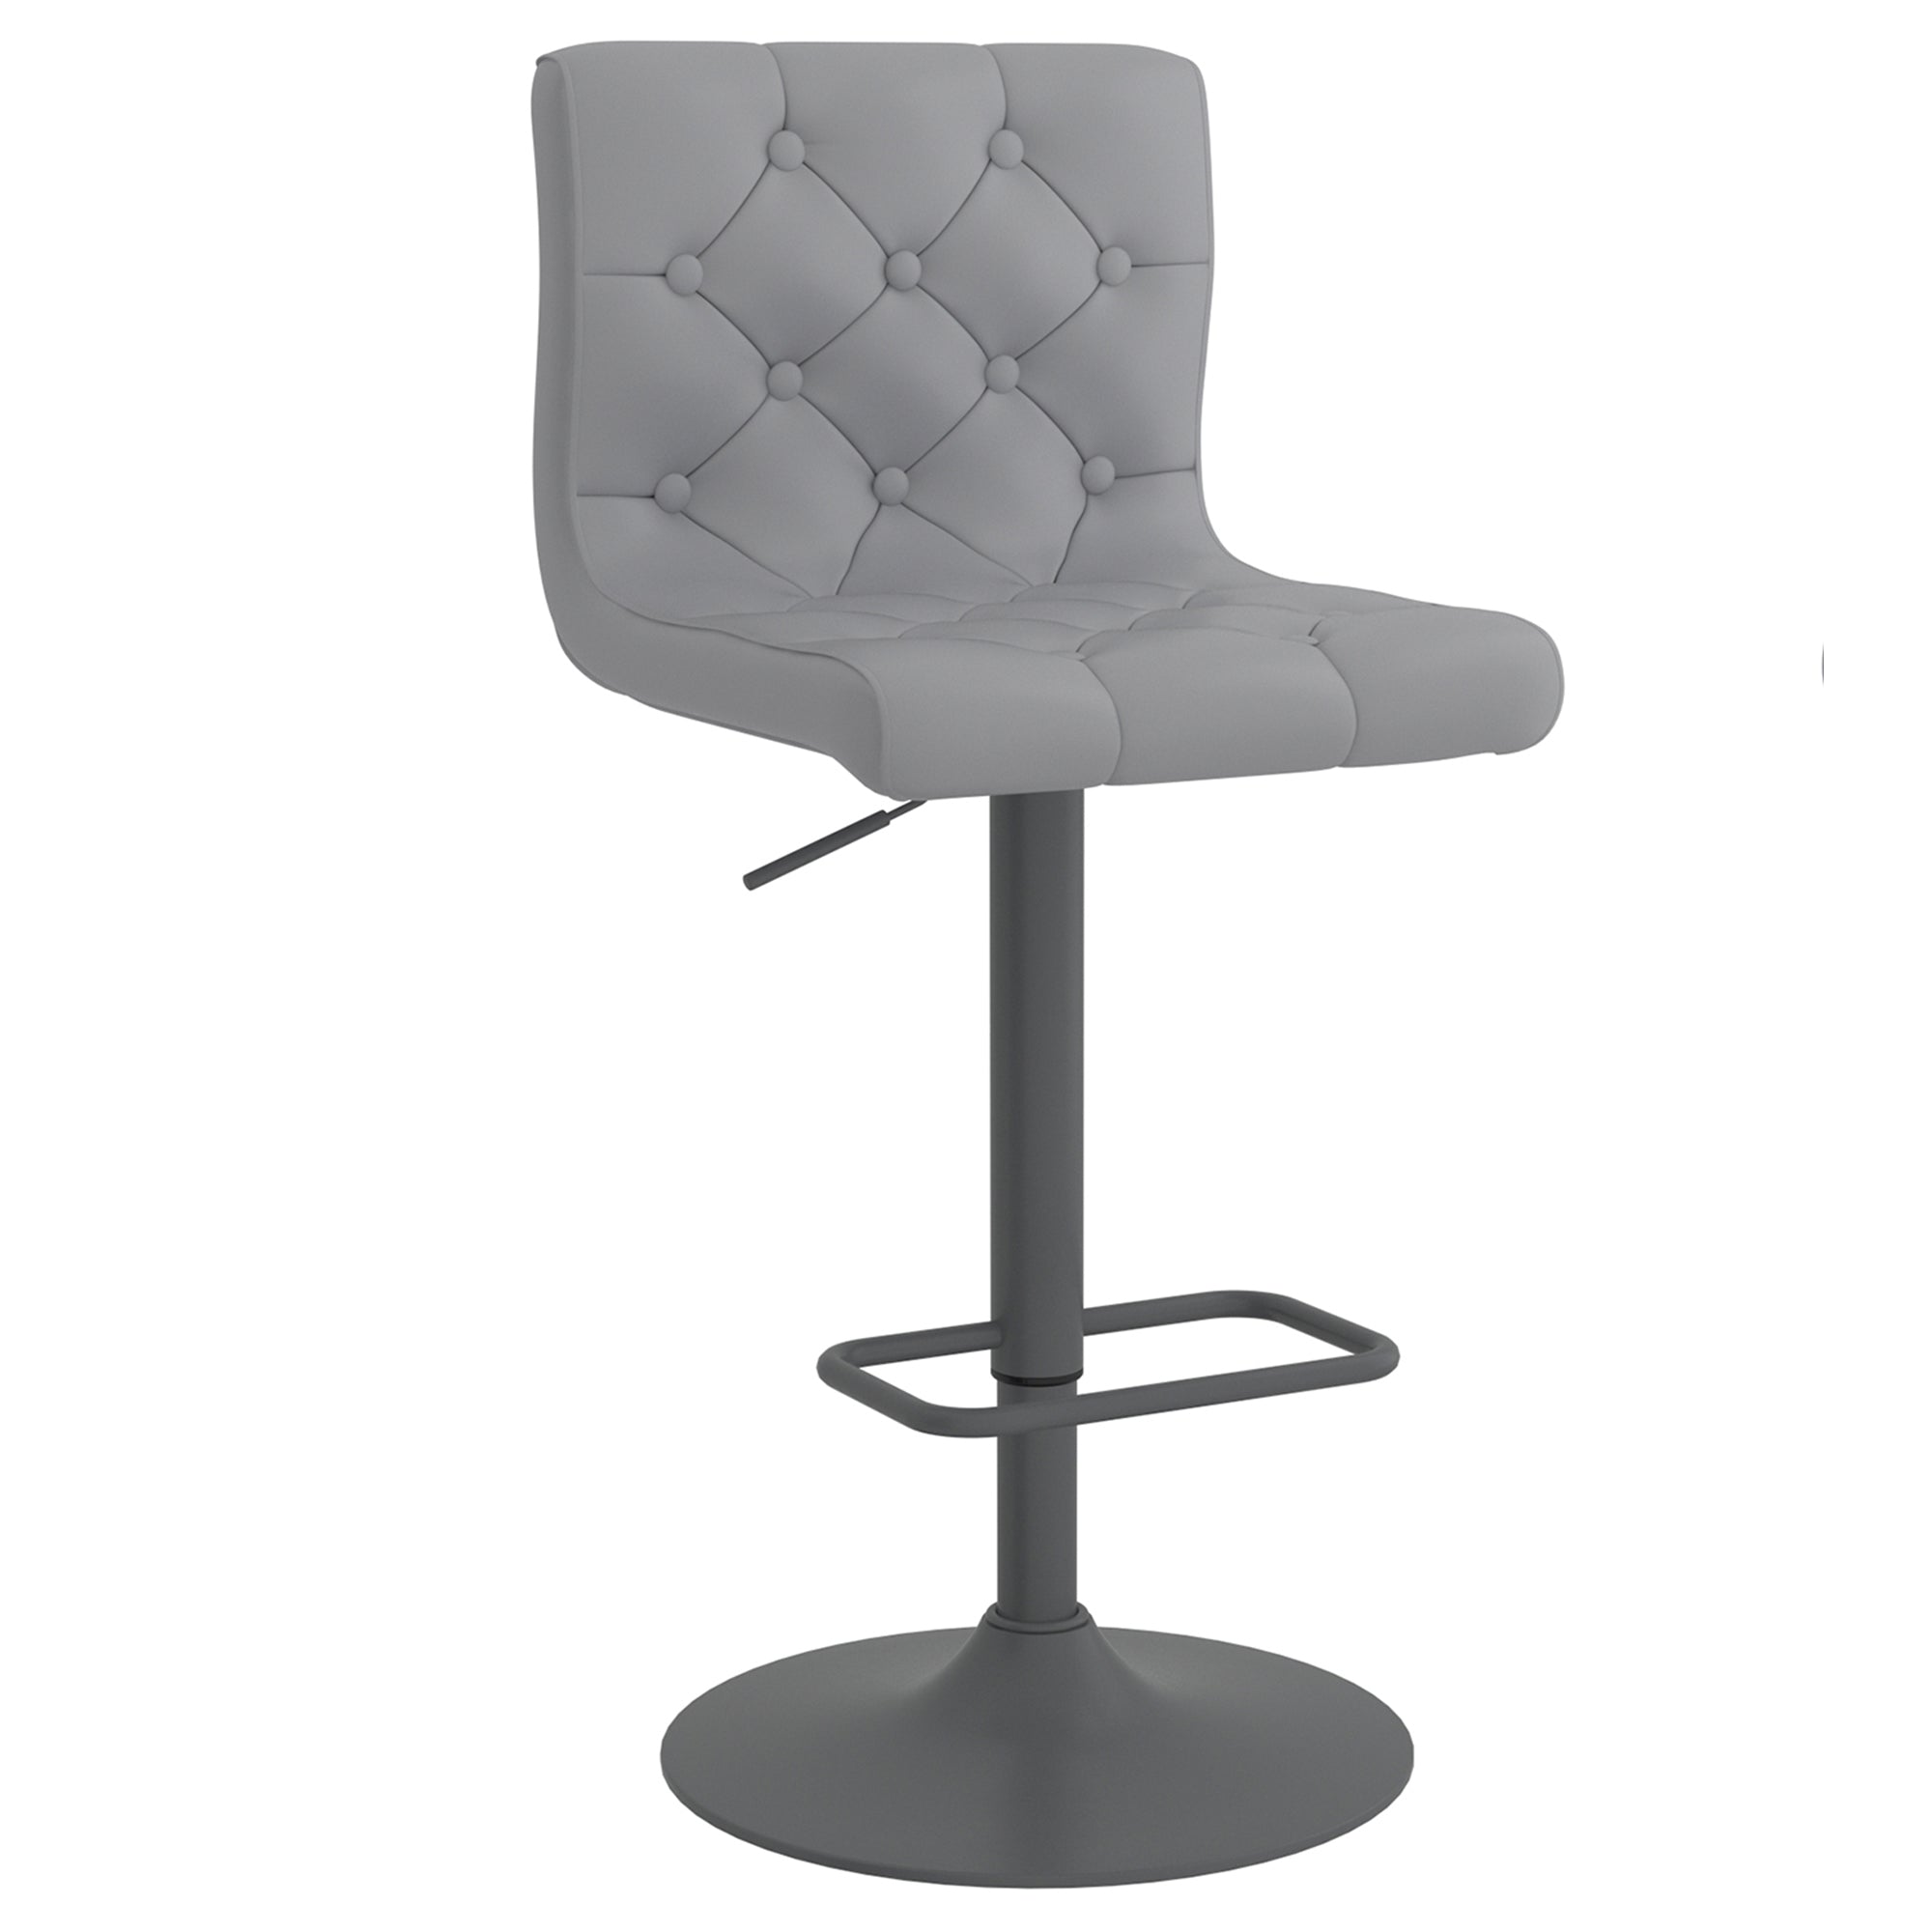 Dex Air Lift Stool - Grey Faux Leather